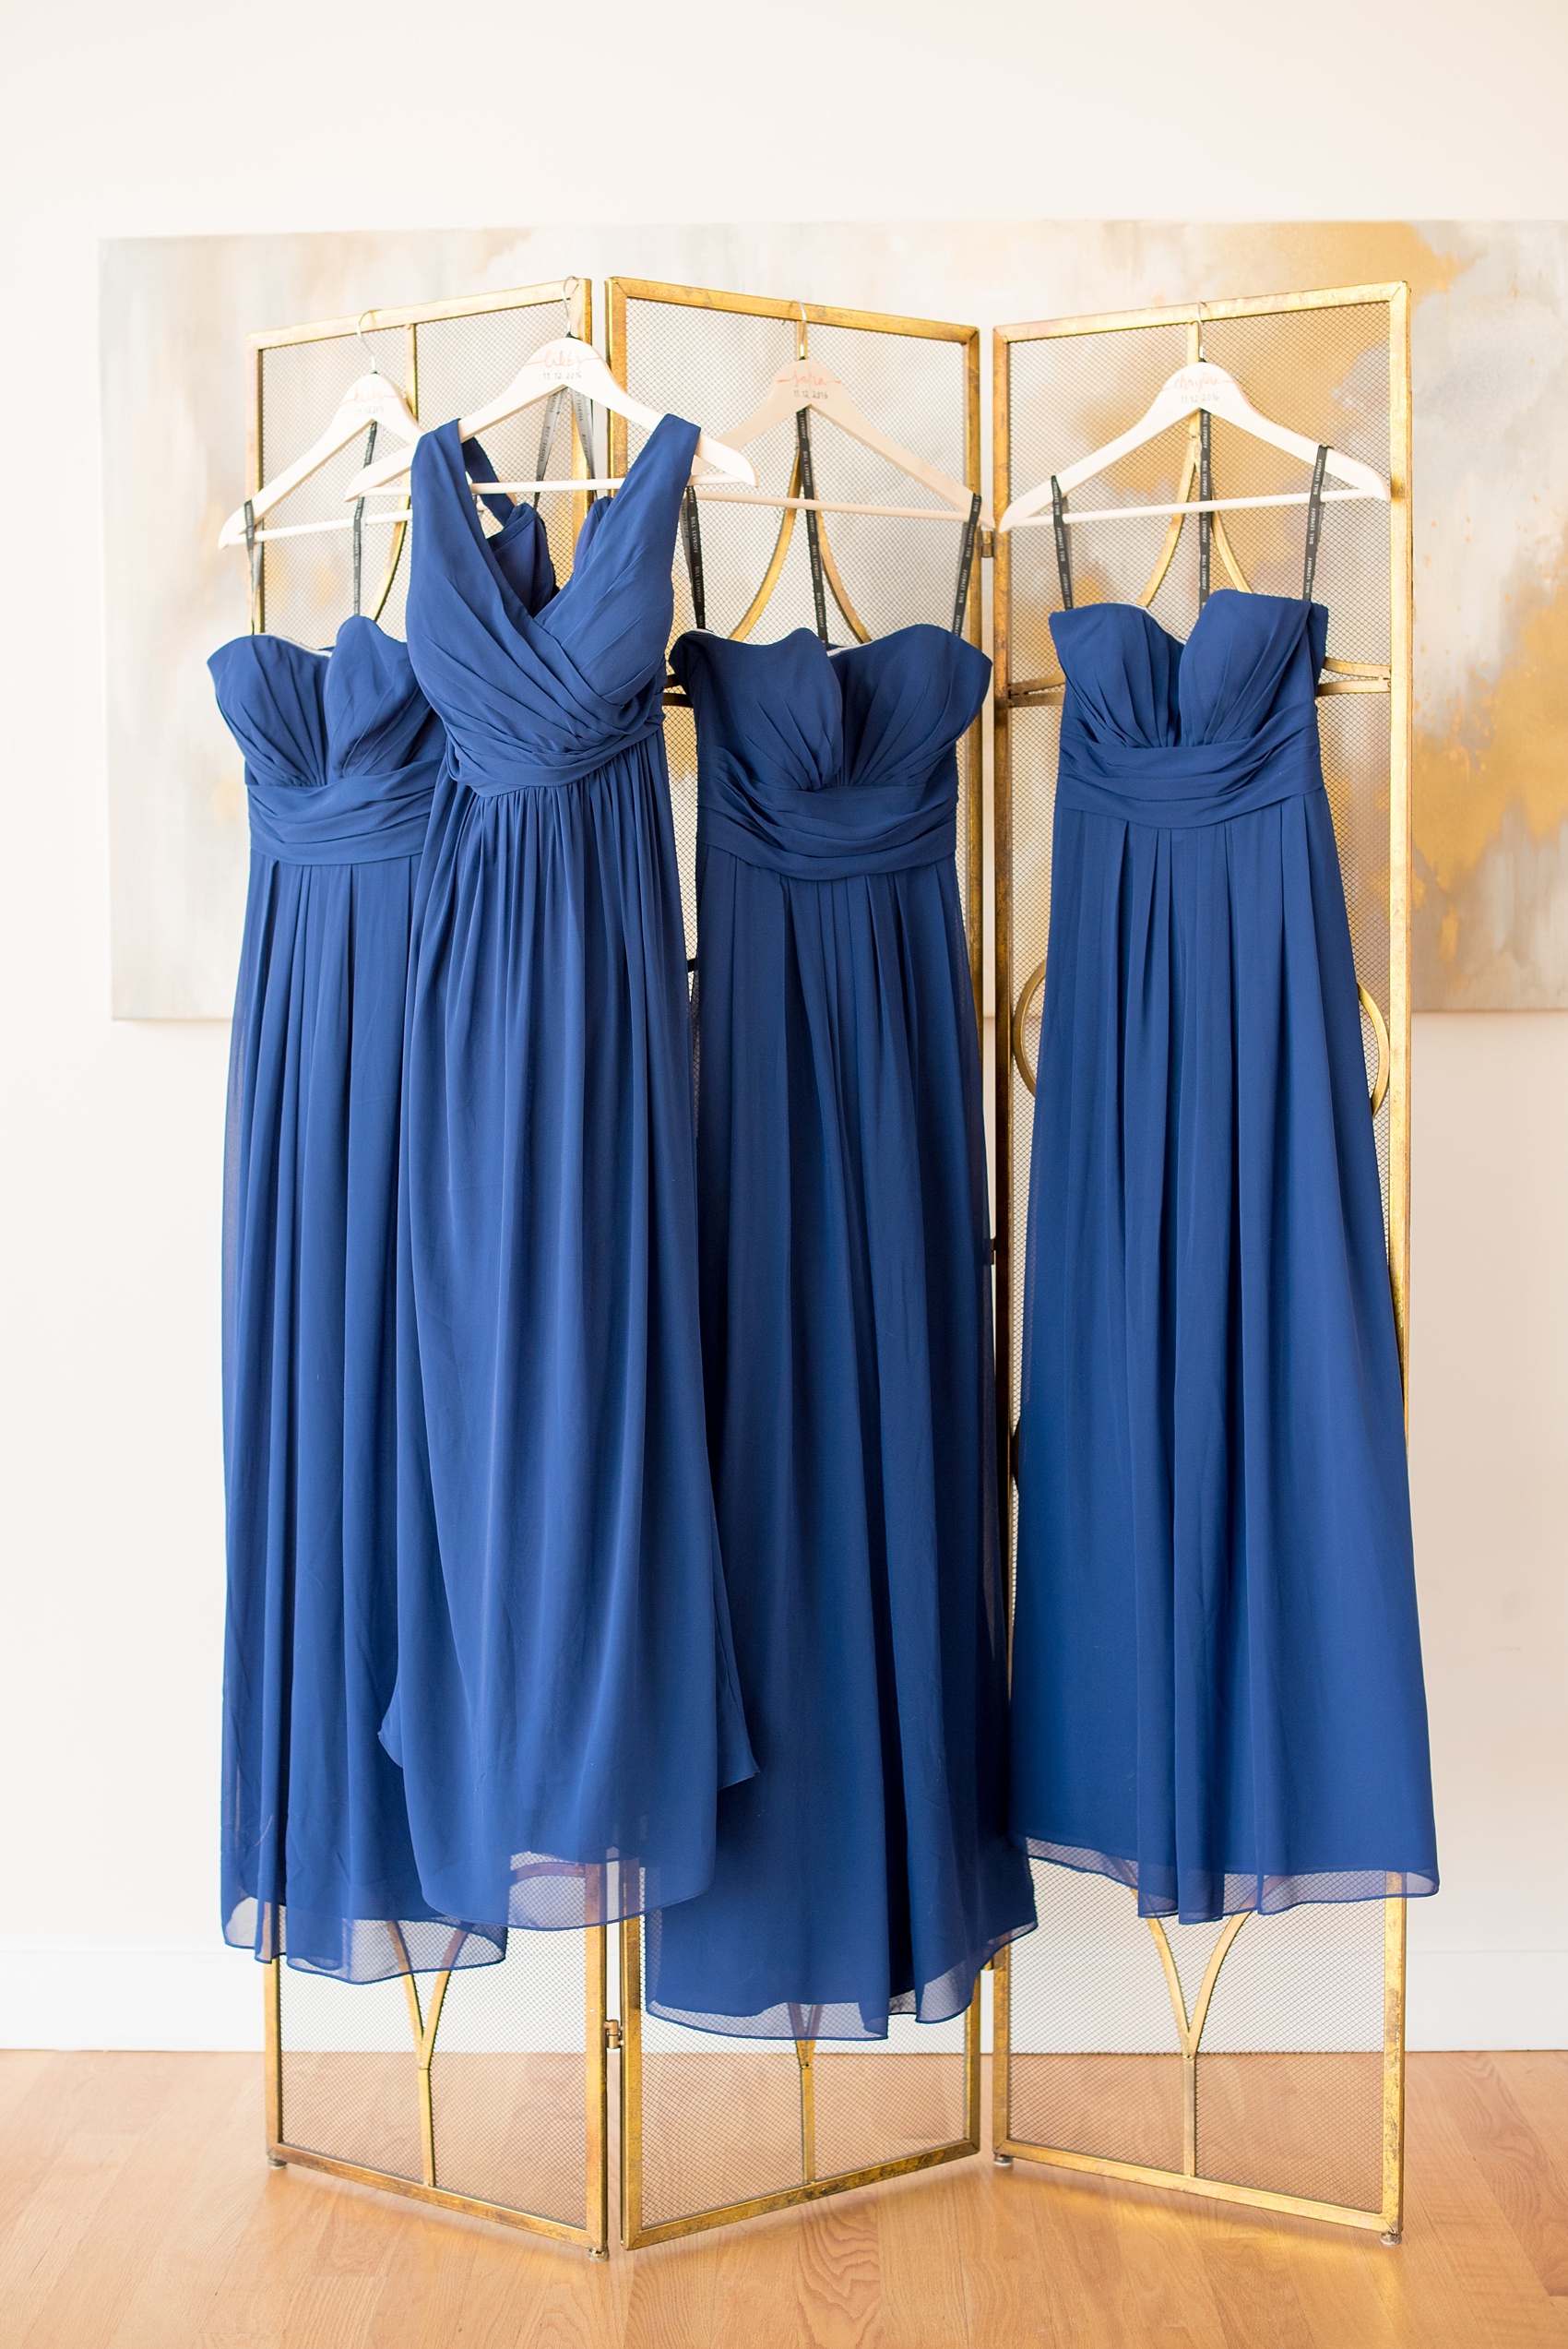 Mikkel Paige Photography photos from a wedding at The Glass Box and Stockroom at 230 in Raleigh. The bridesmaids wore cobalt blue Bill Levkoff gowns.